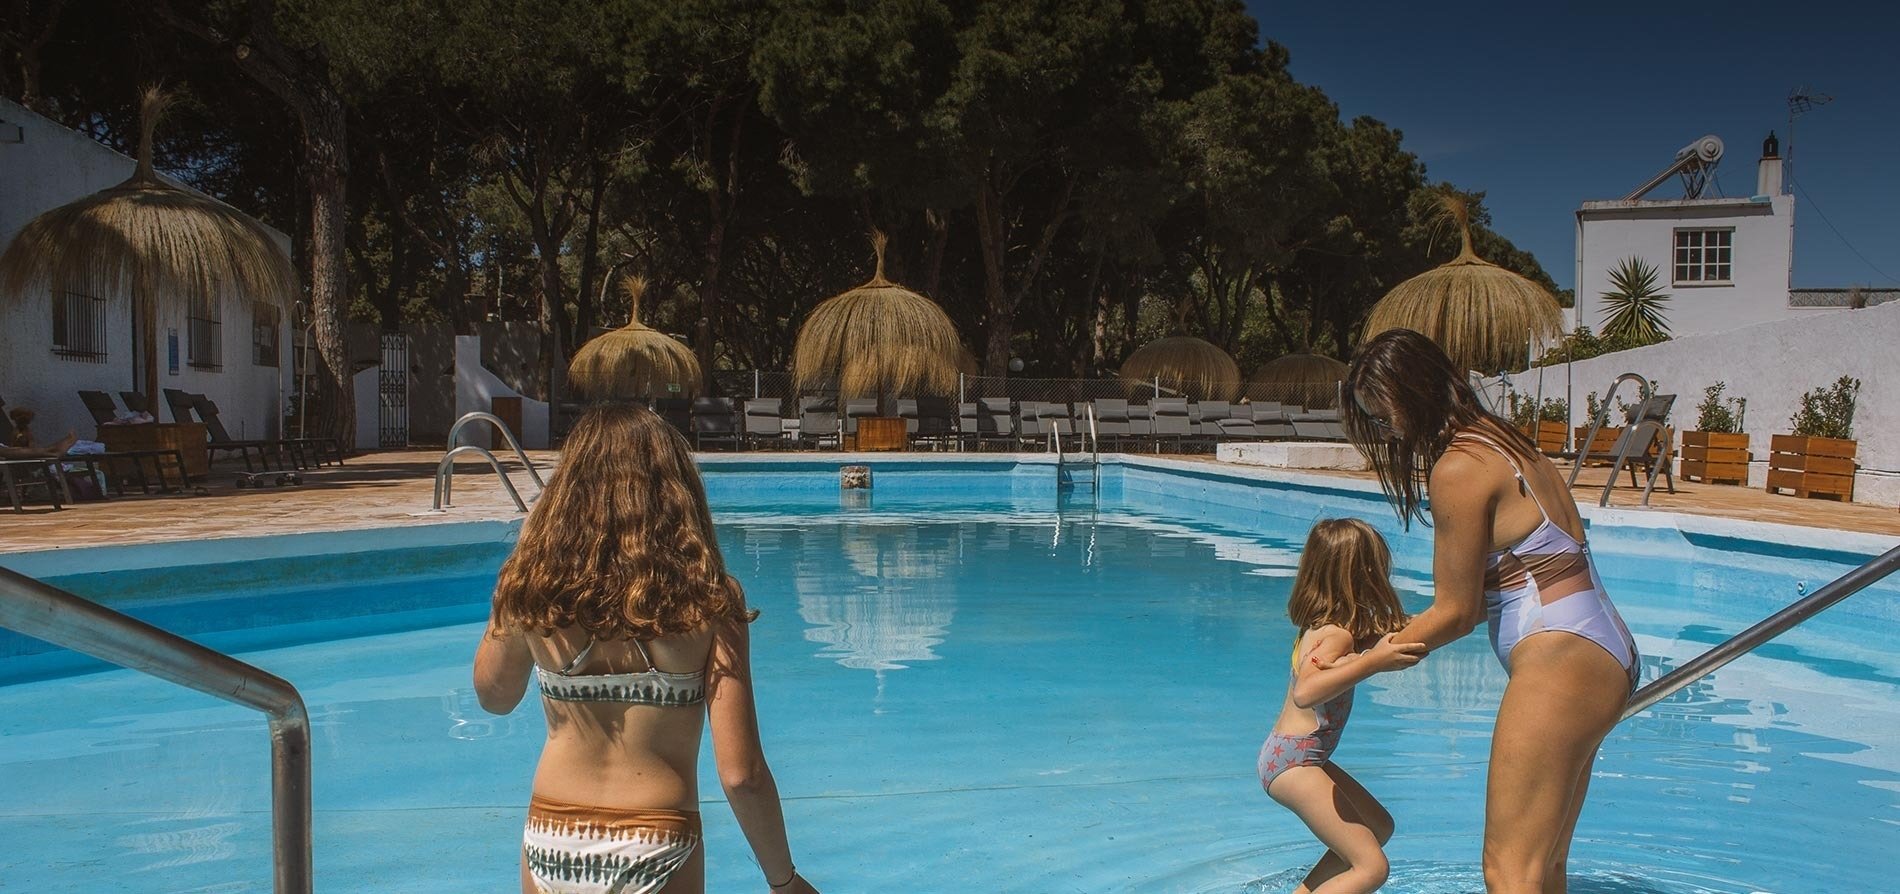 a woman and two girls are in a swimming pool